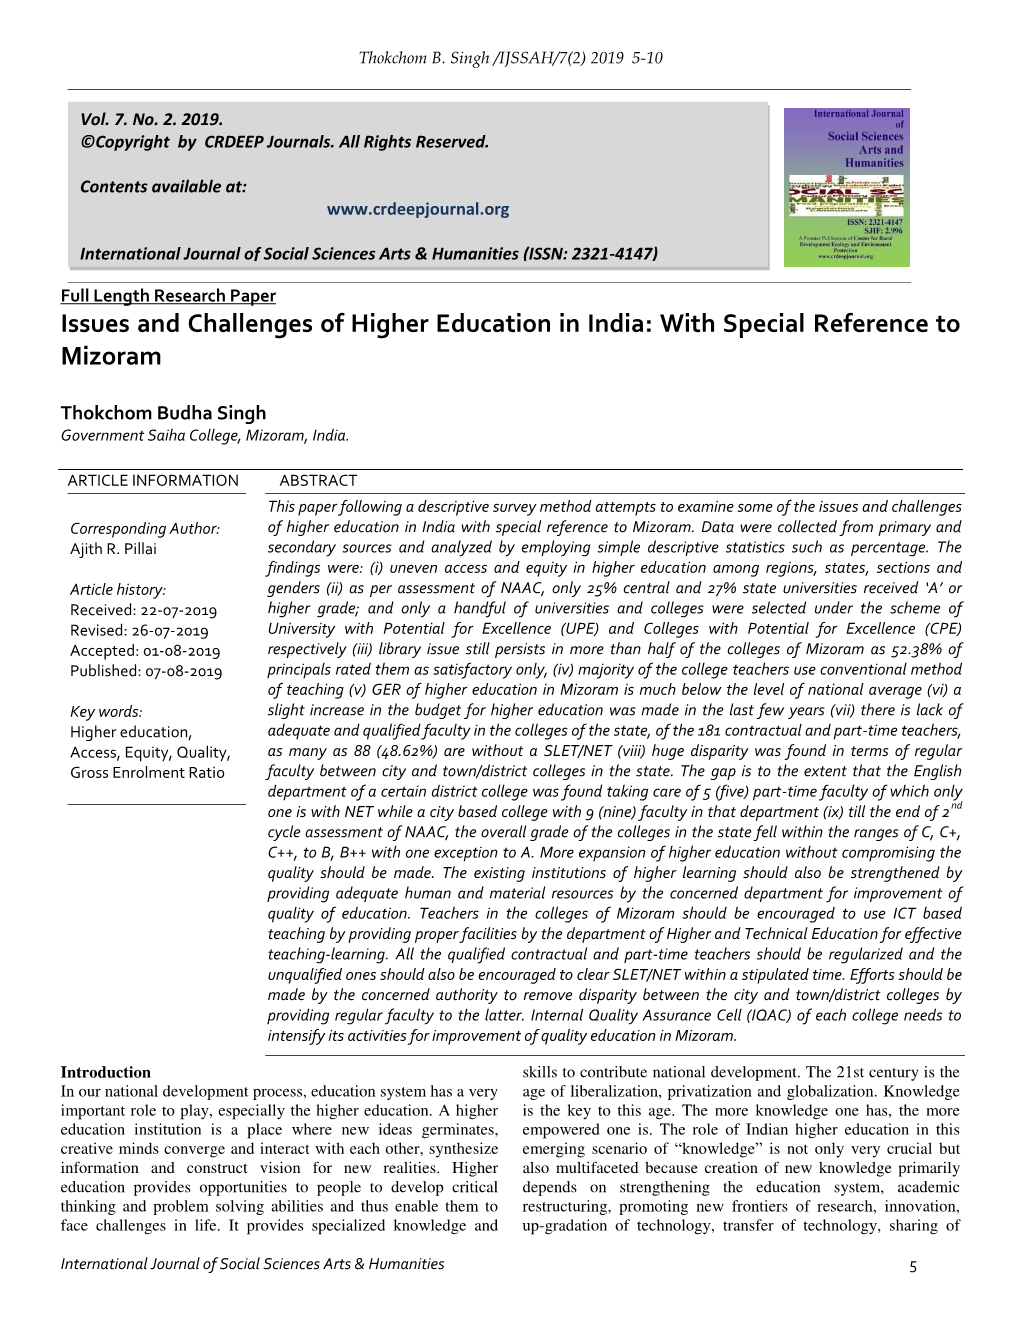 Issues and Challenges of Higher Education in India: with Special Reference to Mizoram